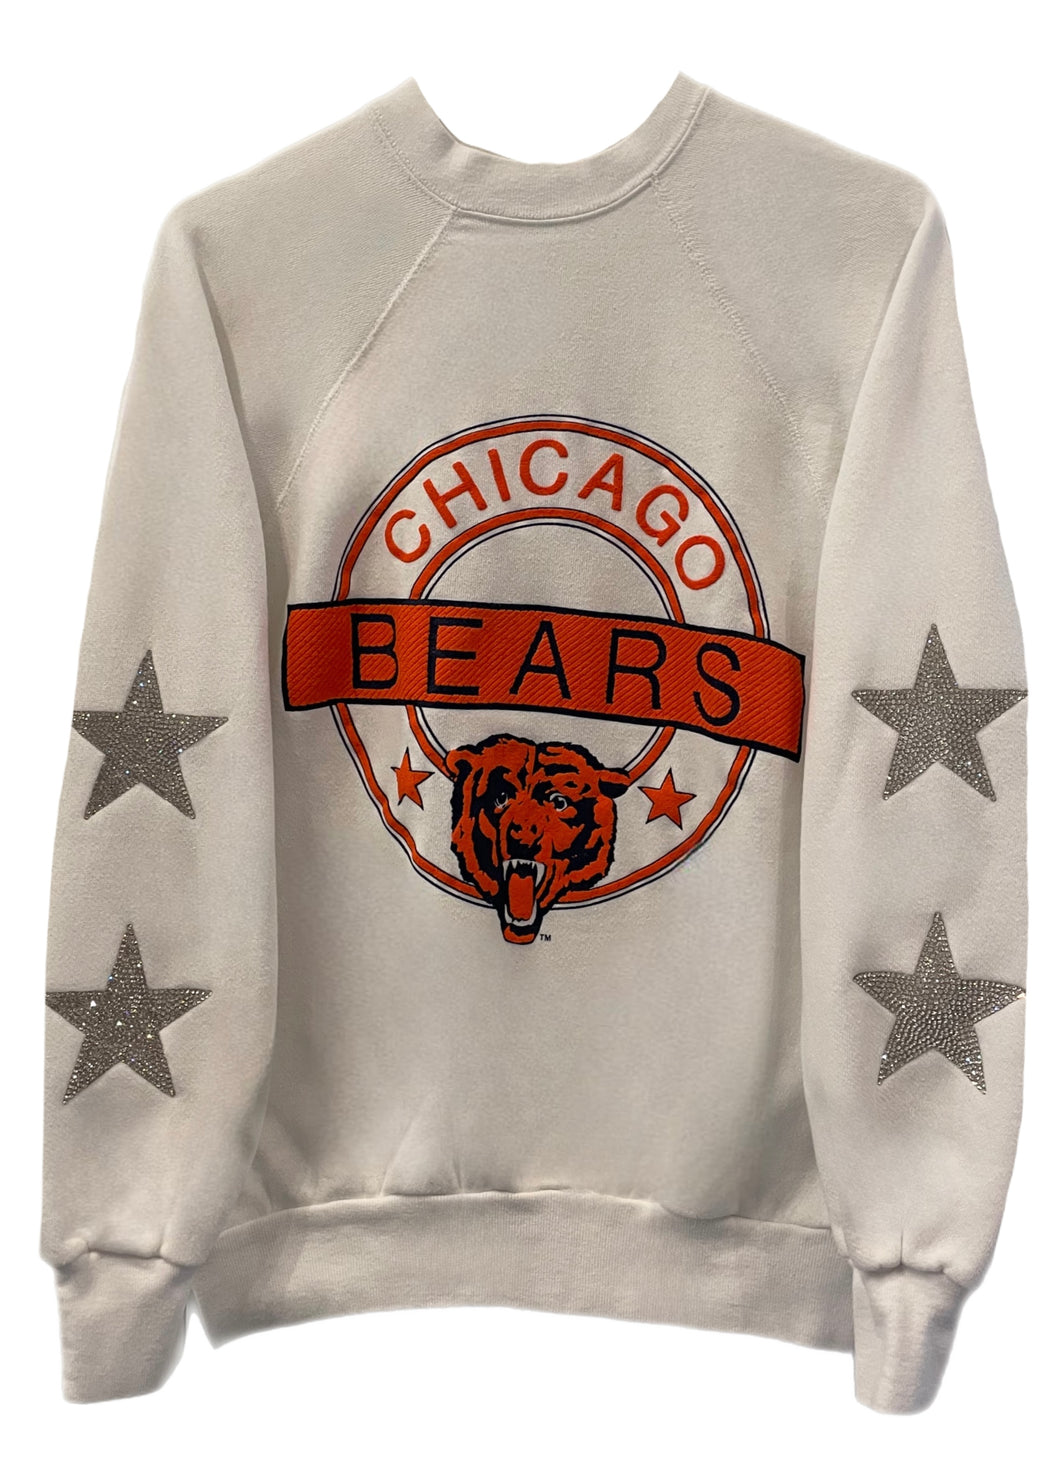 Chicago Bears, NFL One of a KIND 